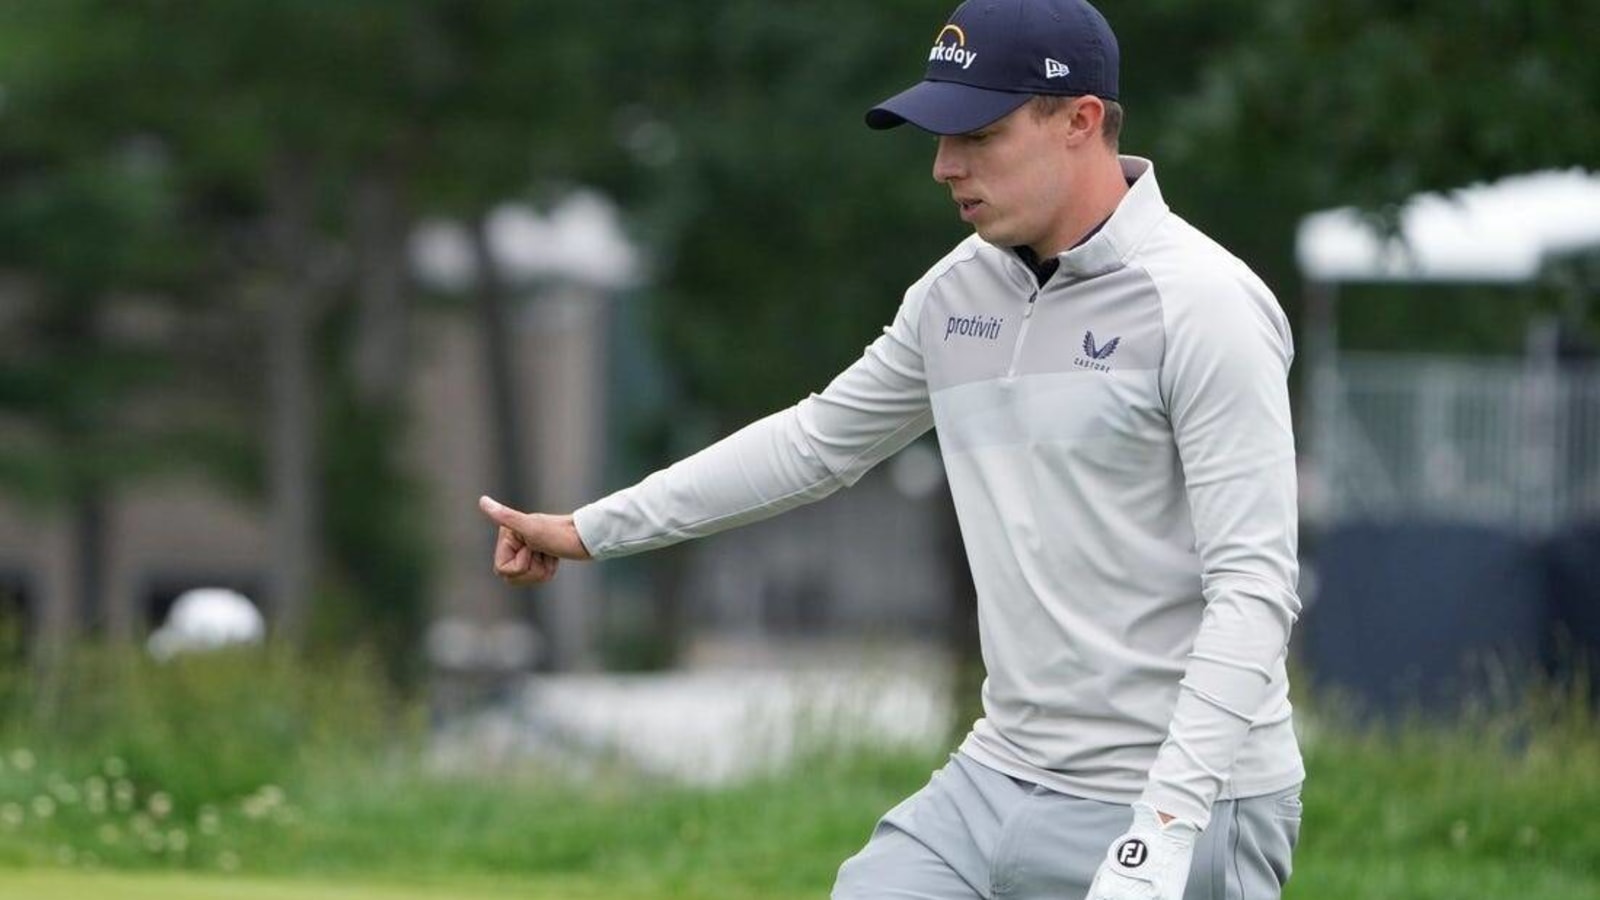 Matt Fitzpatrick holds on to win U.S. Open for first major title